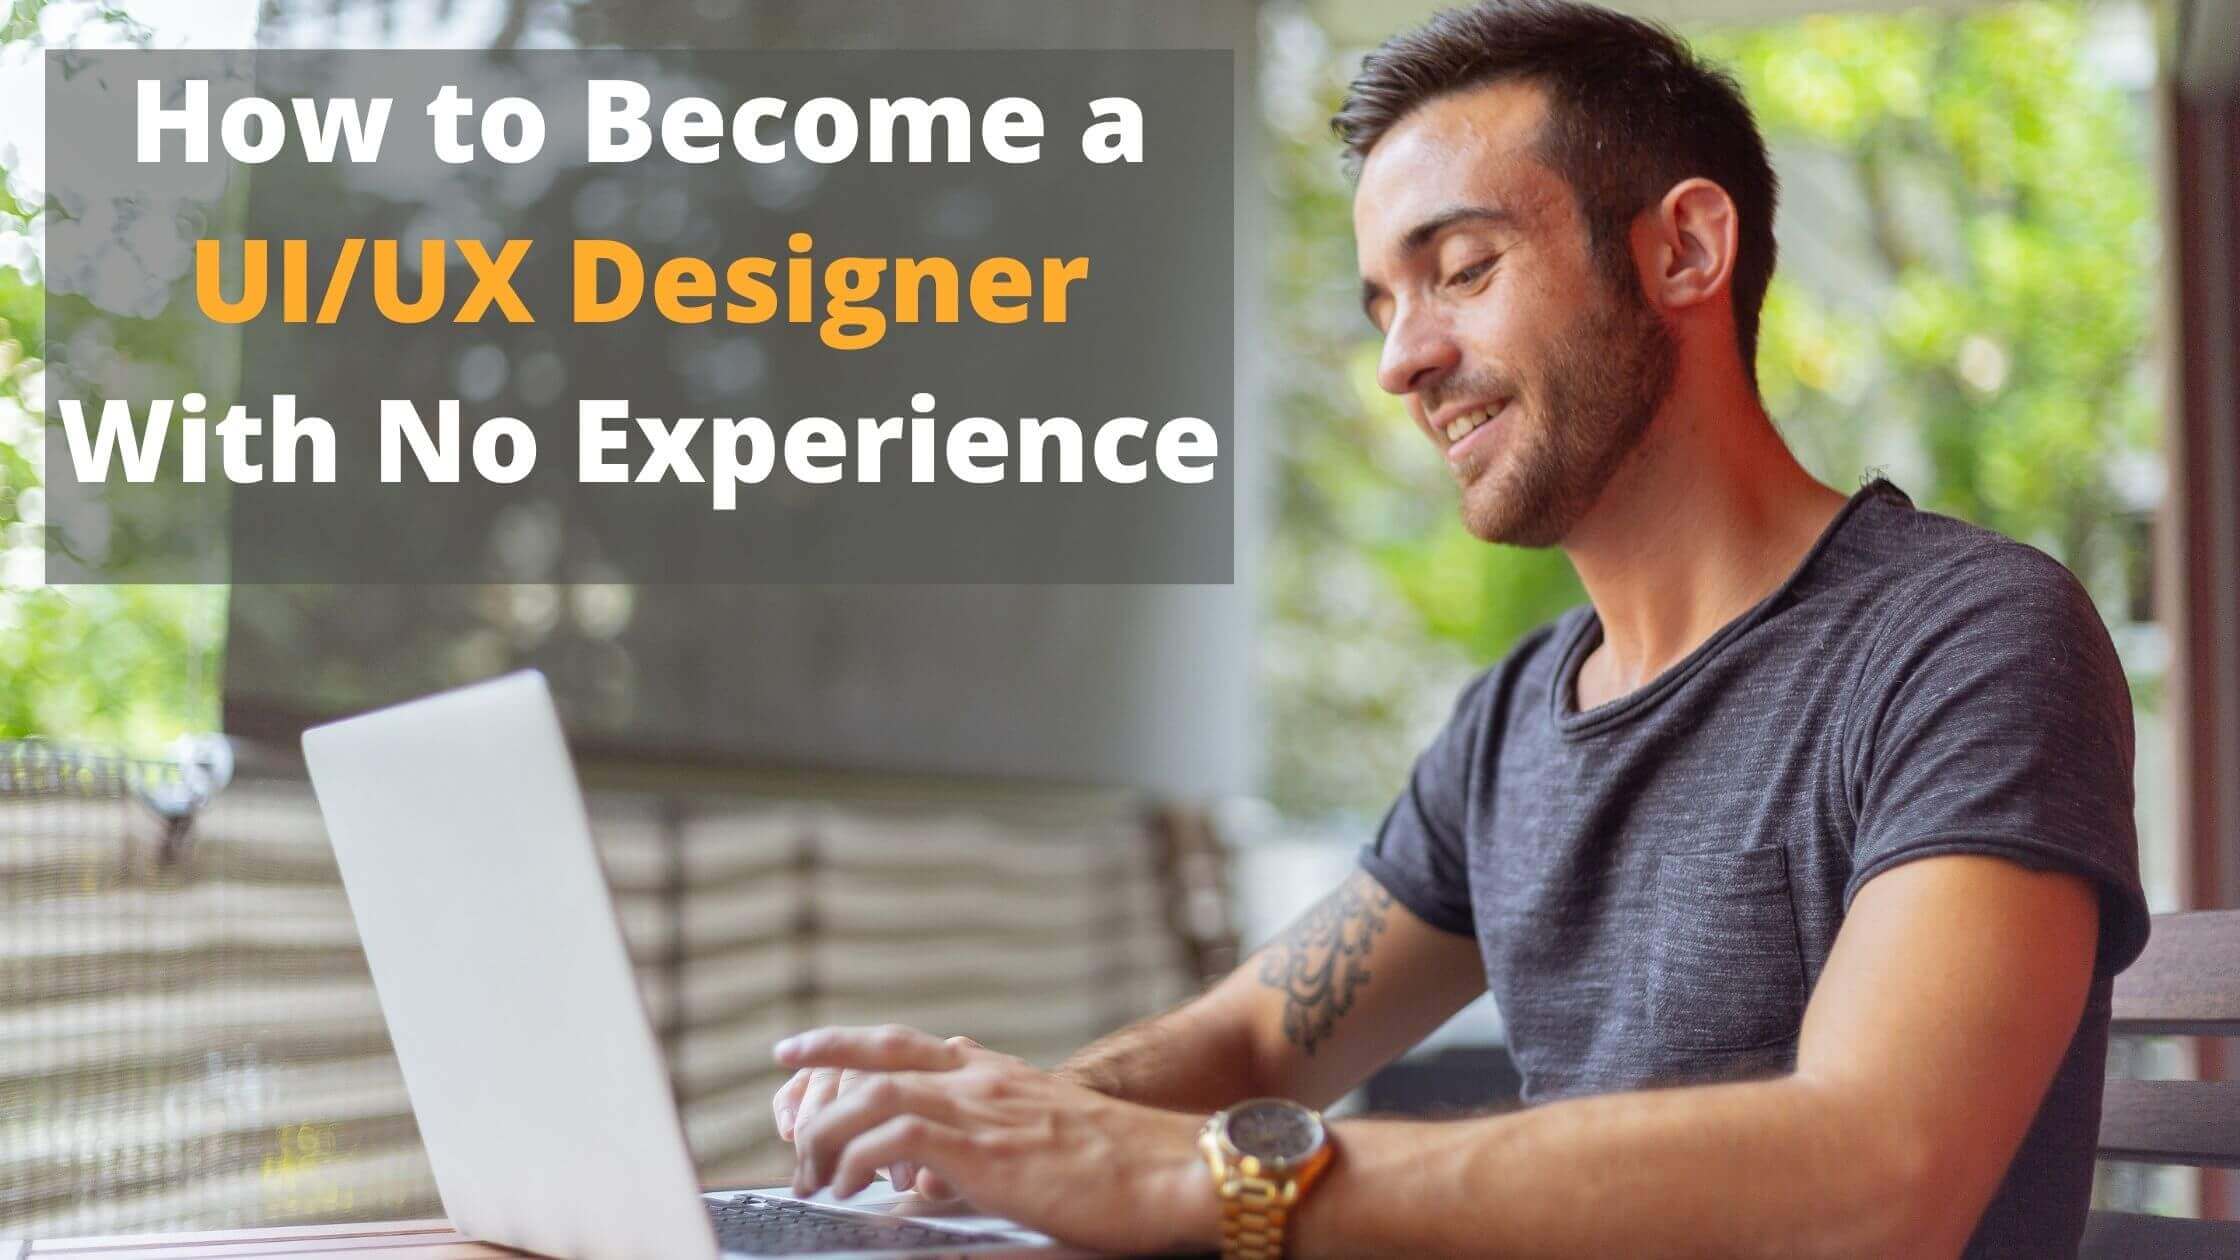 How to Become a UI/UX Designer With No Experience